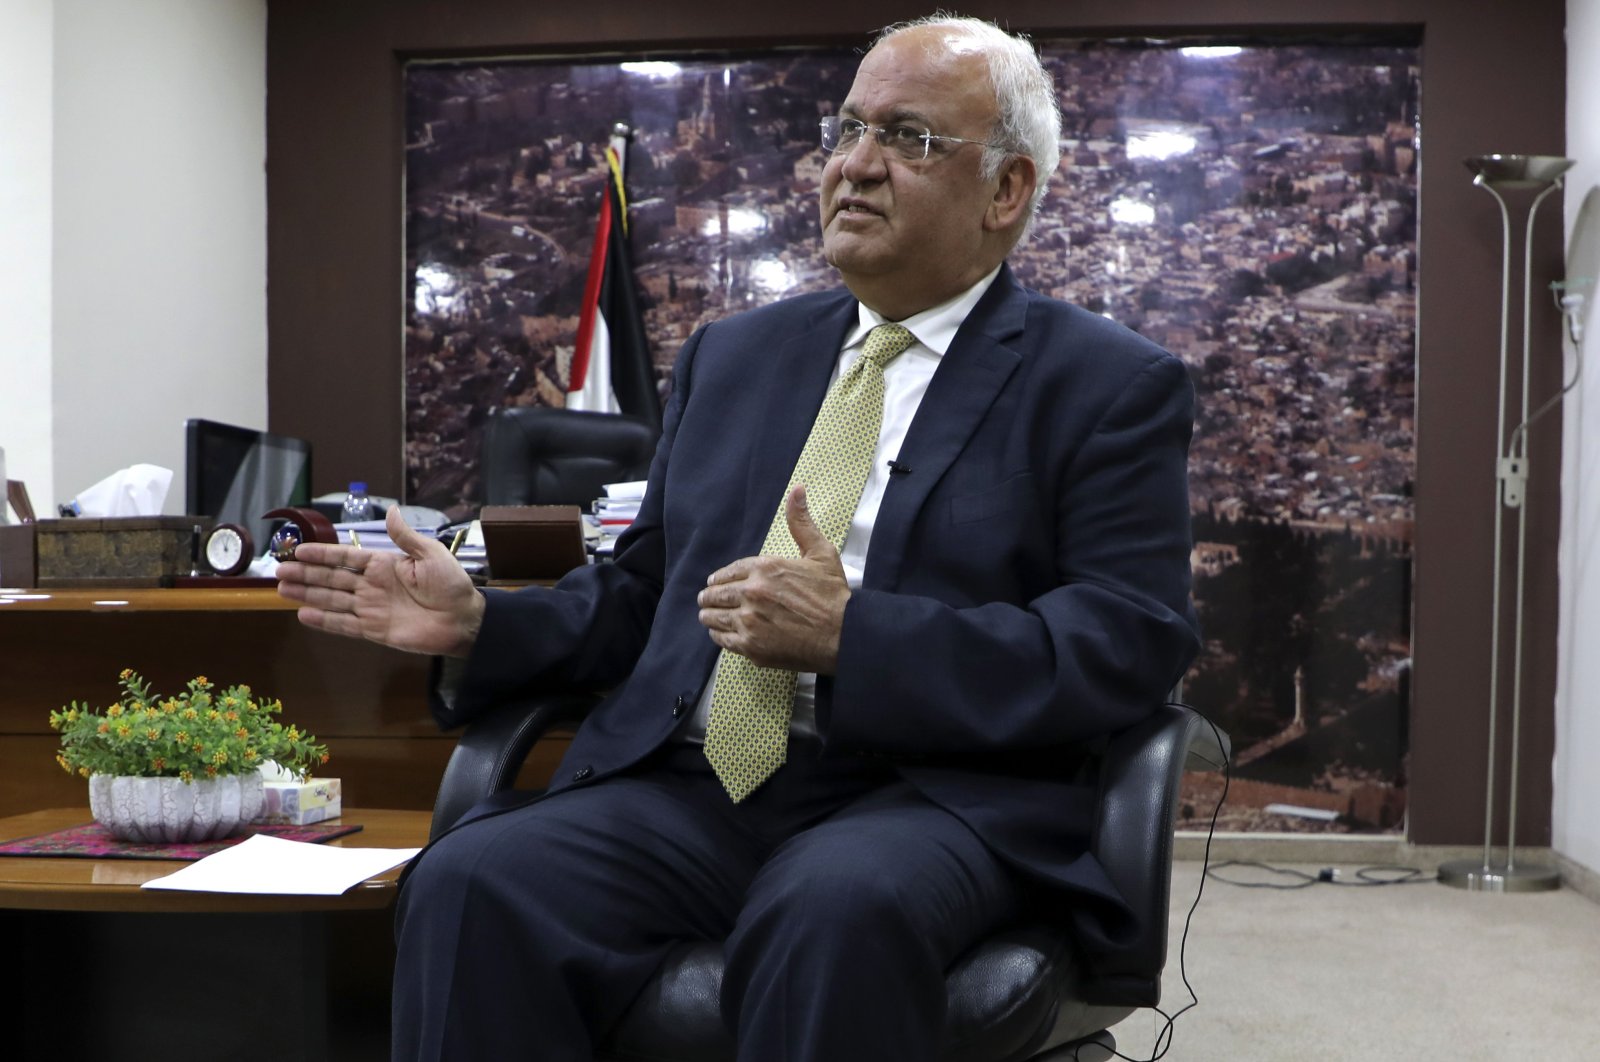 Saeb Erekat, Secretary-General of the Palestine Liberation Organisation and chief Palestinian negotiator, talking to reporters in the West Bank city of Ramallah, Palestine, March 3, 2020  (AFP Photo)